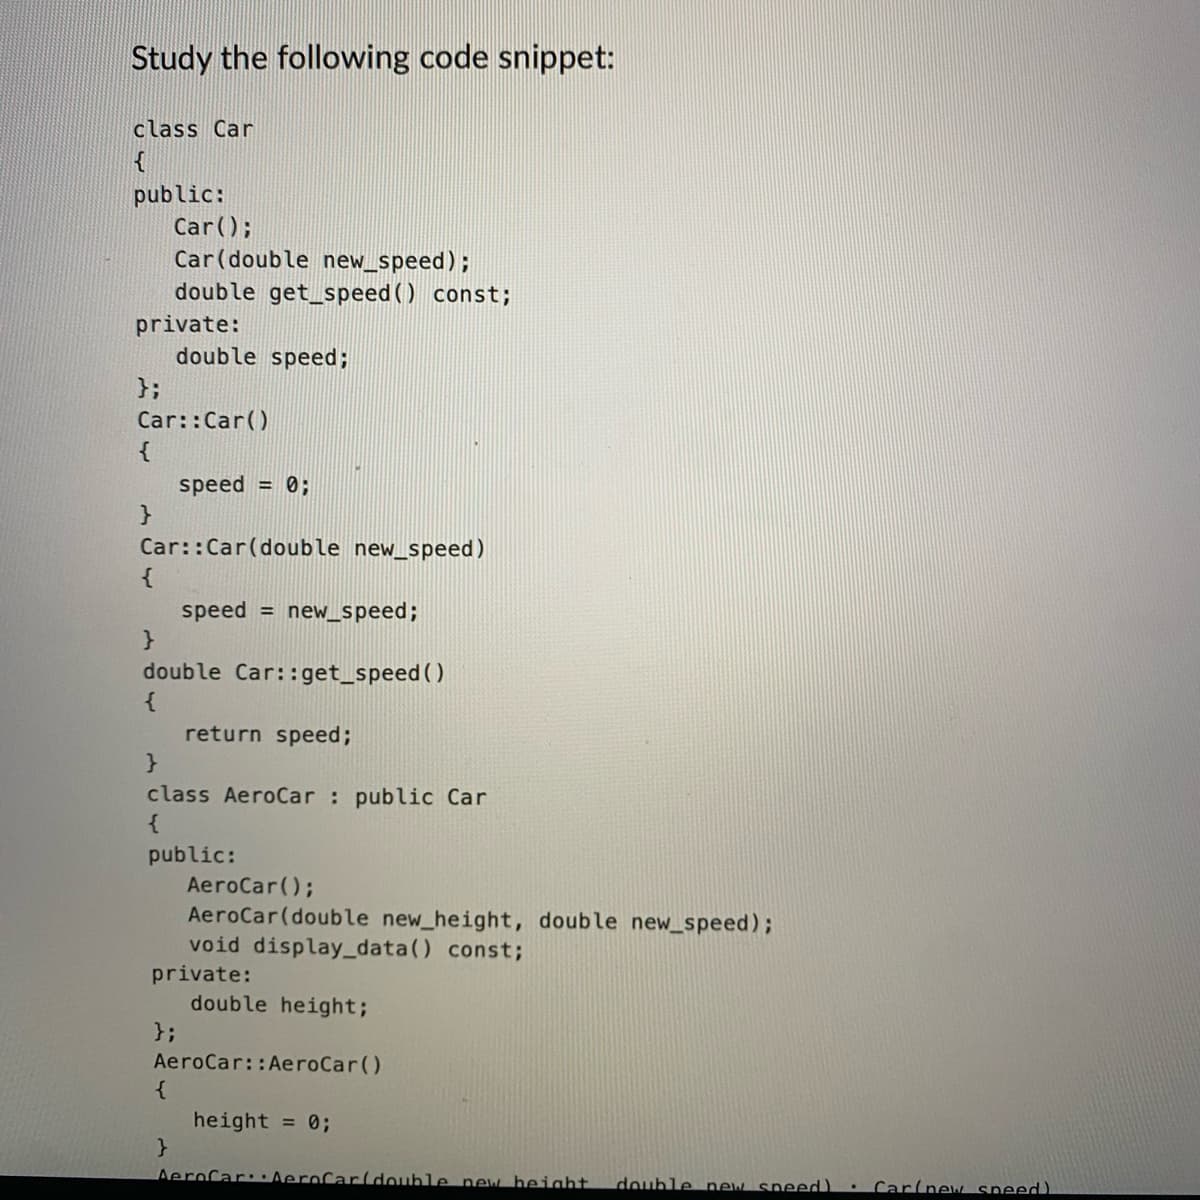 Study the following code snippet:
class Car
{
public:
private:
};
{
Car();
Car (double new_speed);
double get_speed() const;
Car::Car()
double speed;
}
Car::Car (double new_speed)
{
speed = new_speed;
}
double Car::get_speed()
{
speed = 0;
}
class AeroCar: public Car
{
public:
};
{
}
return speed;
private:
AeroCar();
AeroCar (double new_height, double new_speed);
void display_data() const;
AeroCar::AeroCar()
double height;
height = 0;
AeroCar: AeroCar(double new height. double new speed)
.
Car(new speed).